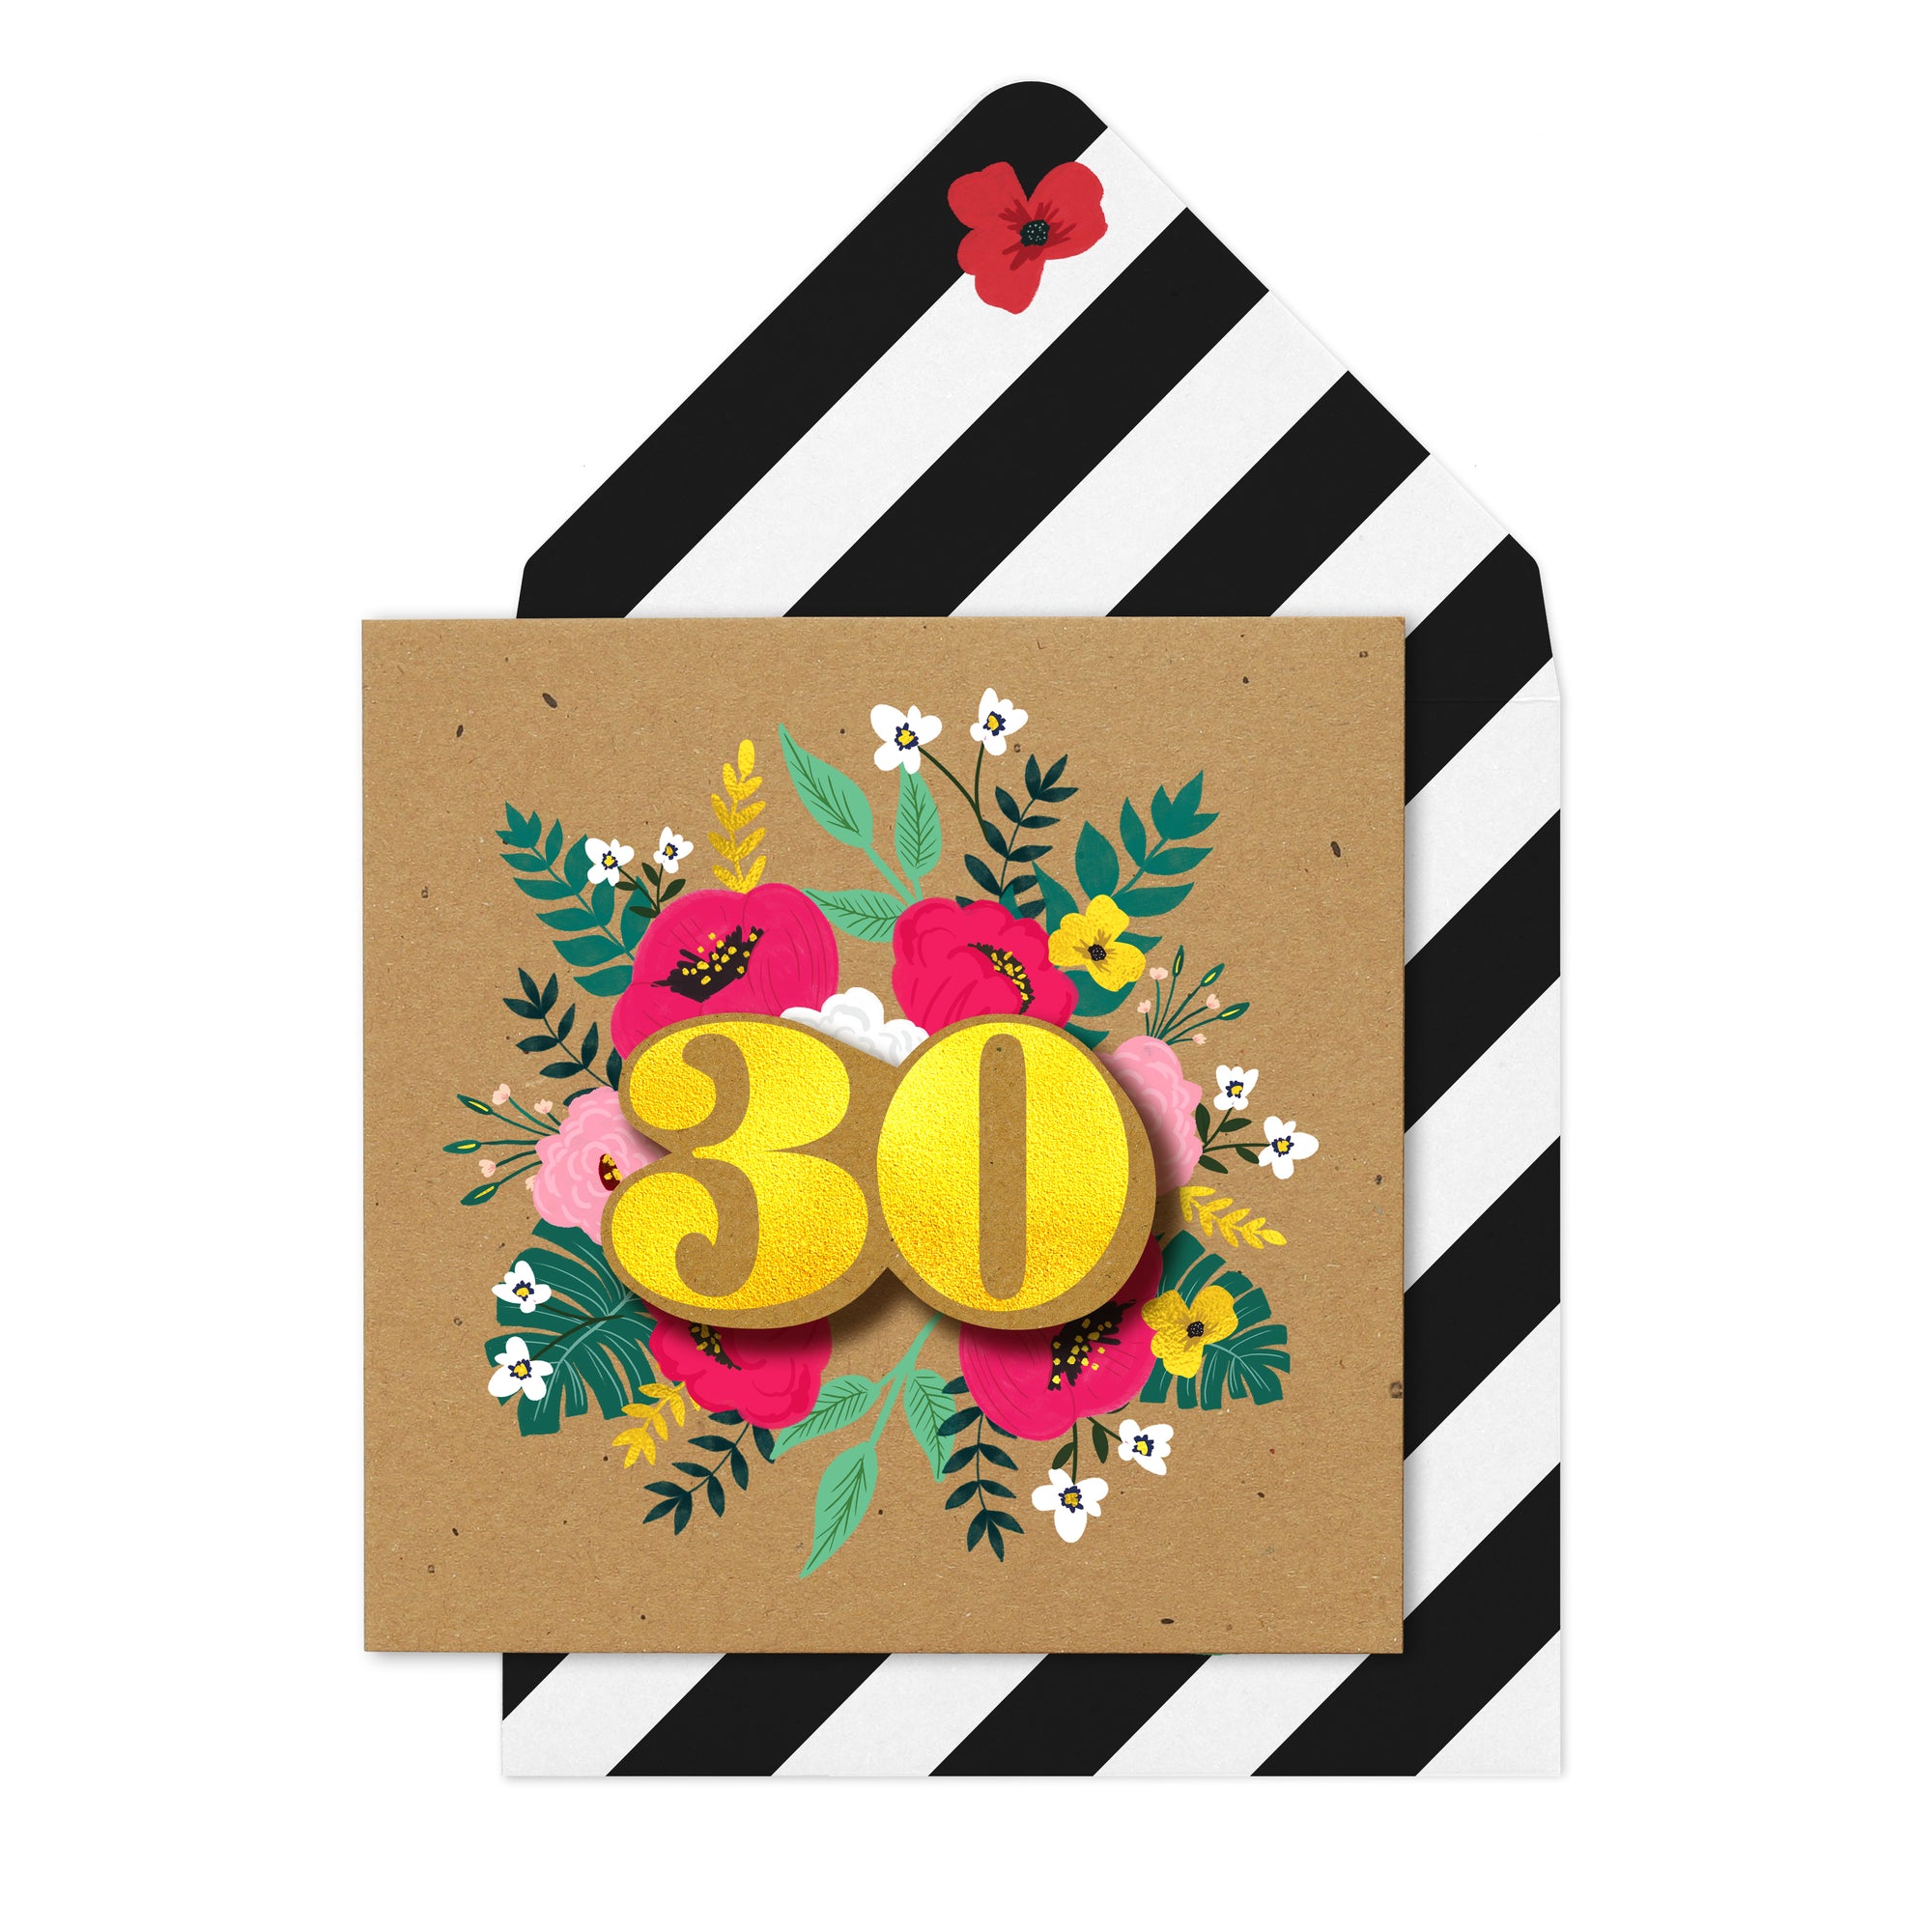 3D Floral Kraft 30th Birthday Card from Penny Black